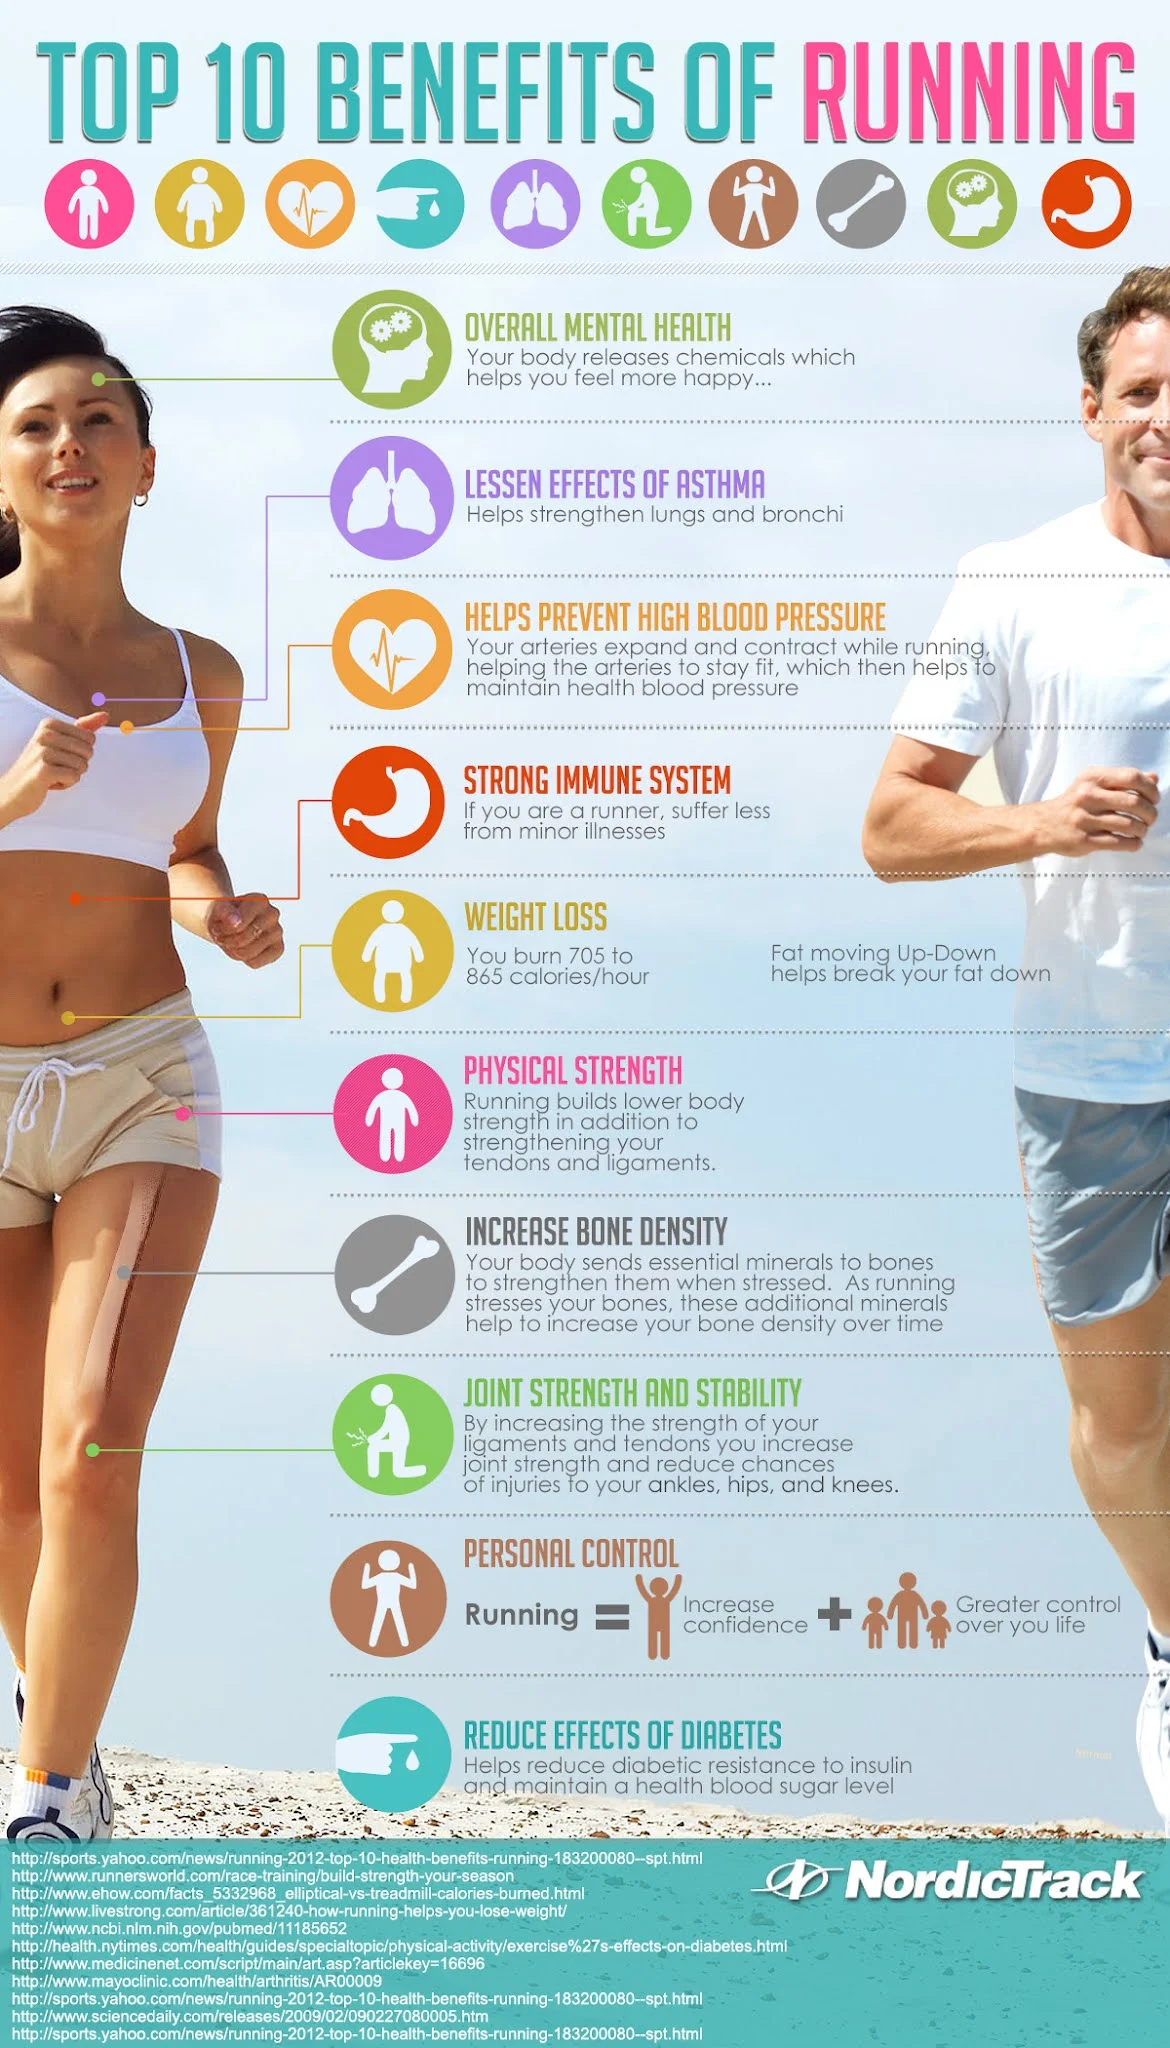 Discover the amazing health benefits of running